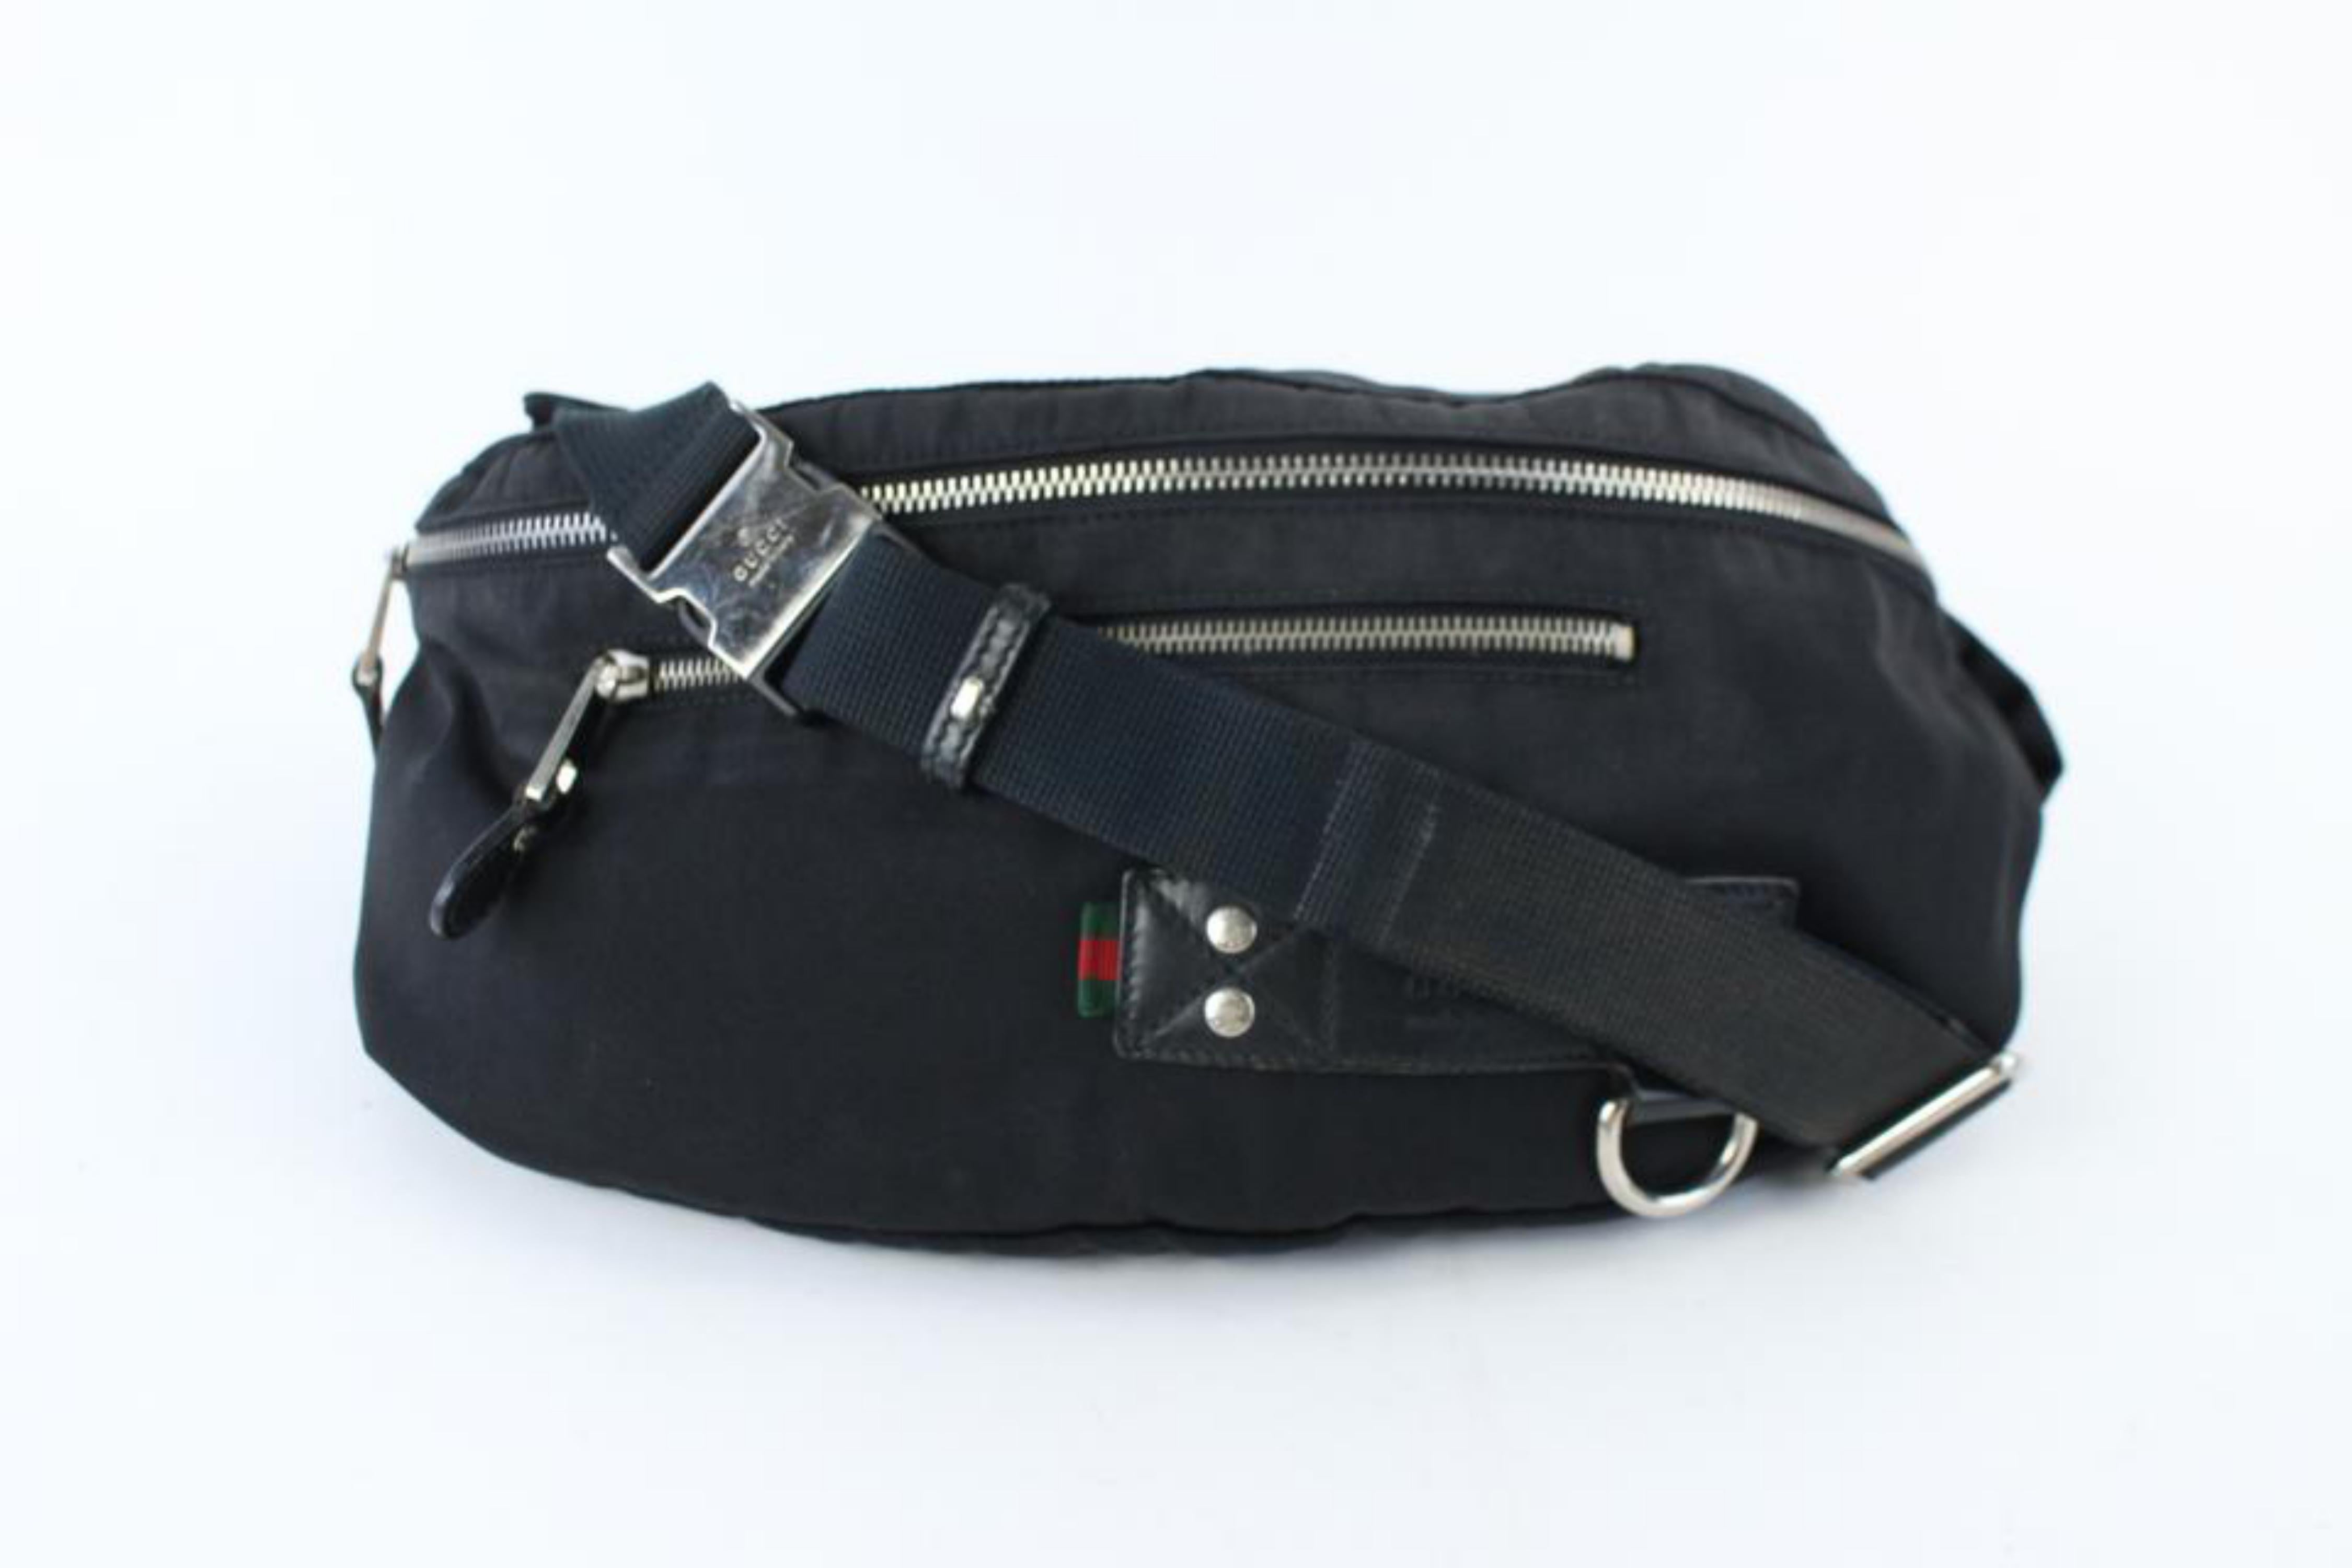 Gucci Bum Web Tag Waist Pouch 18gz0724 Black Canvas X Nylon Weekend/Travel Bag In Good Condition For Sale In Forest Hills, NY